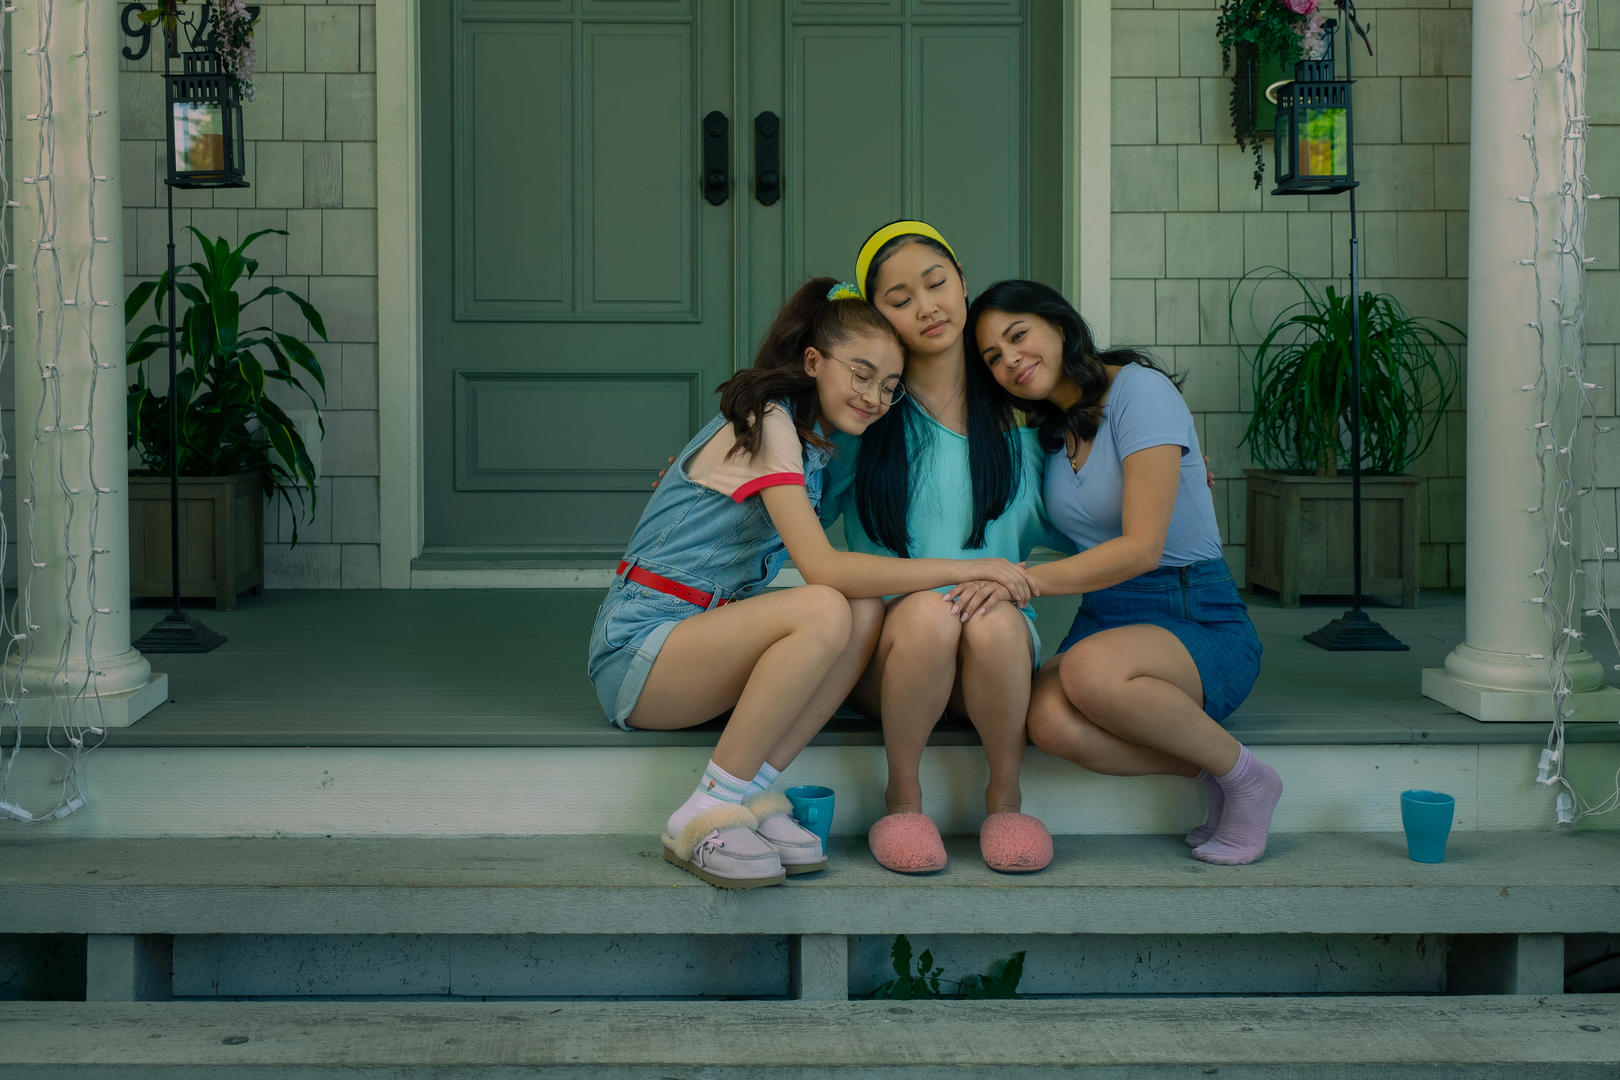 TO ALL THE BOYS: ALWAYS AND FOREVER (L-R): ANNA CATHCART as KITTY, LANA CONDOR as LARA JEAN, JANEL PARRISH as MARGOT. KATIE YU/NETFLIXÂ Â© 2021